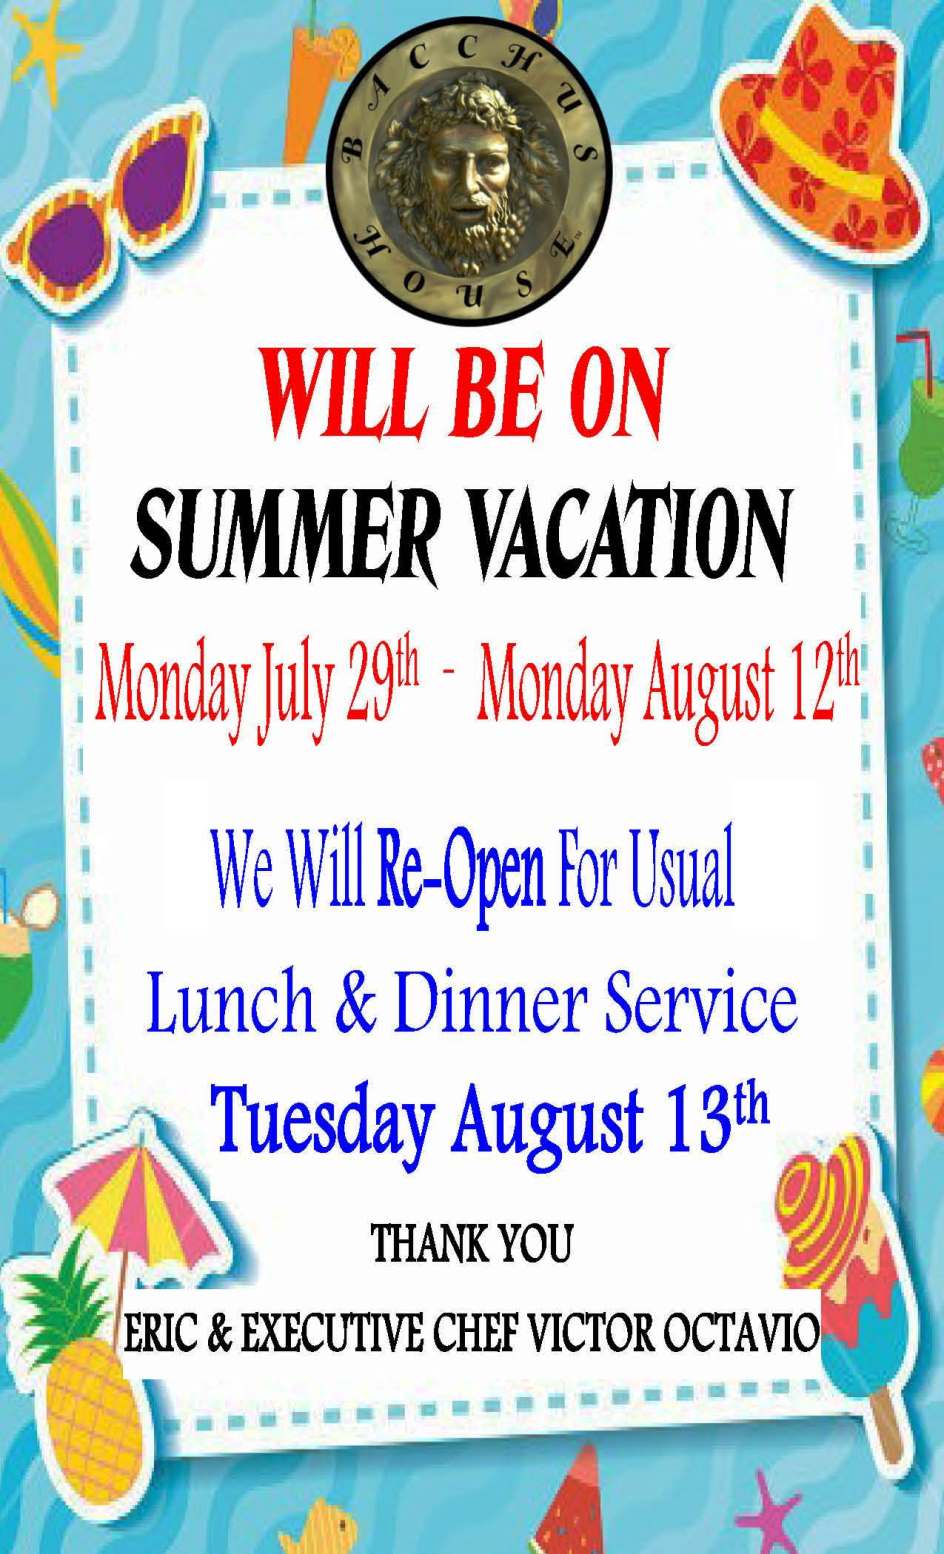 We will be Closed for Summer Vacation